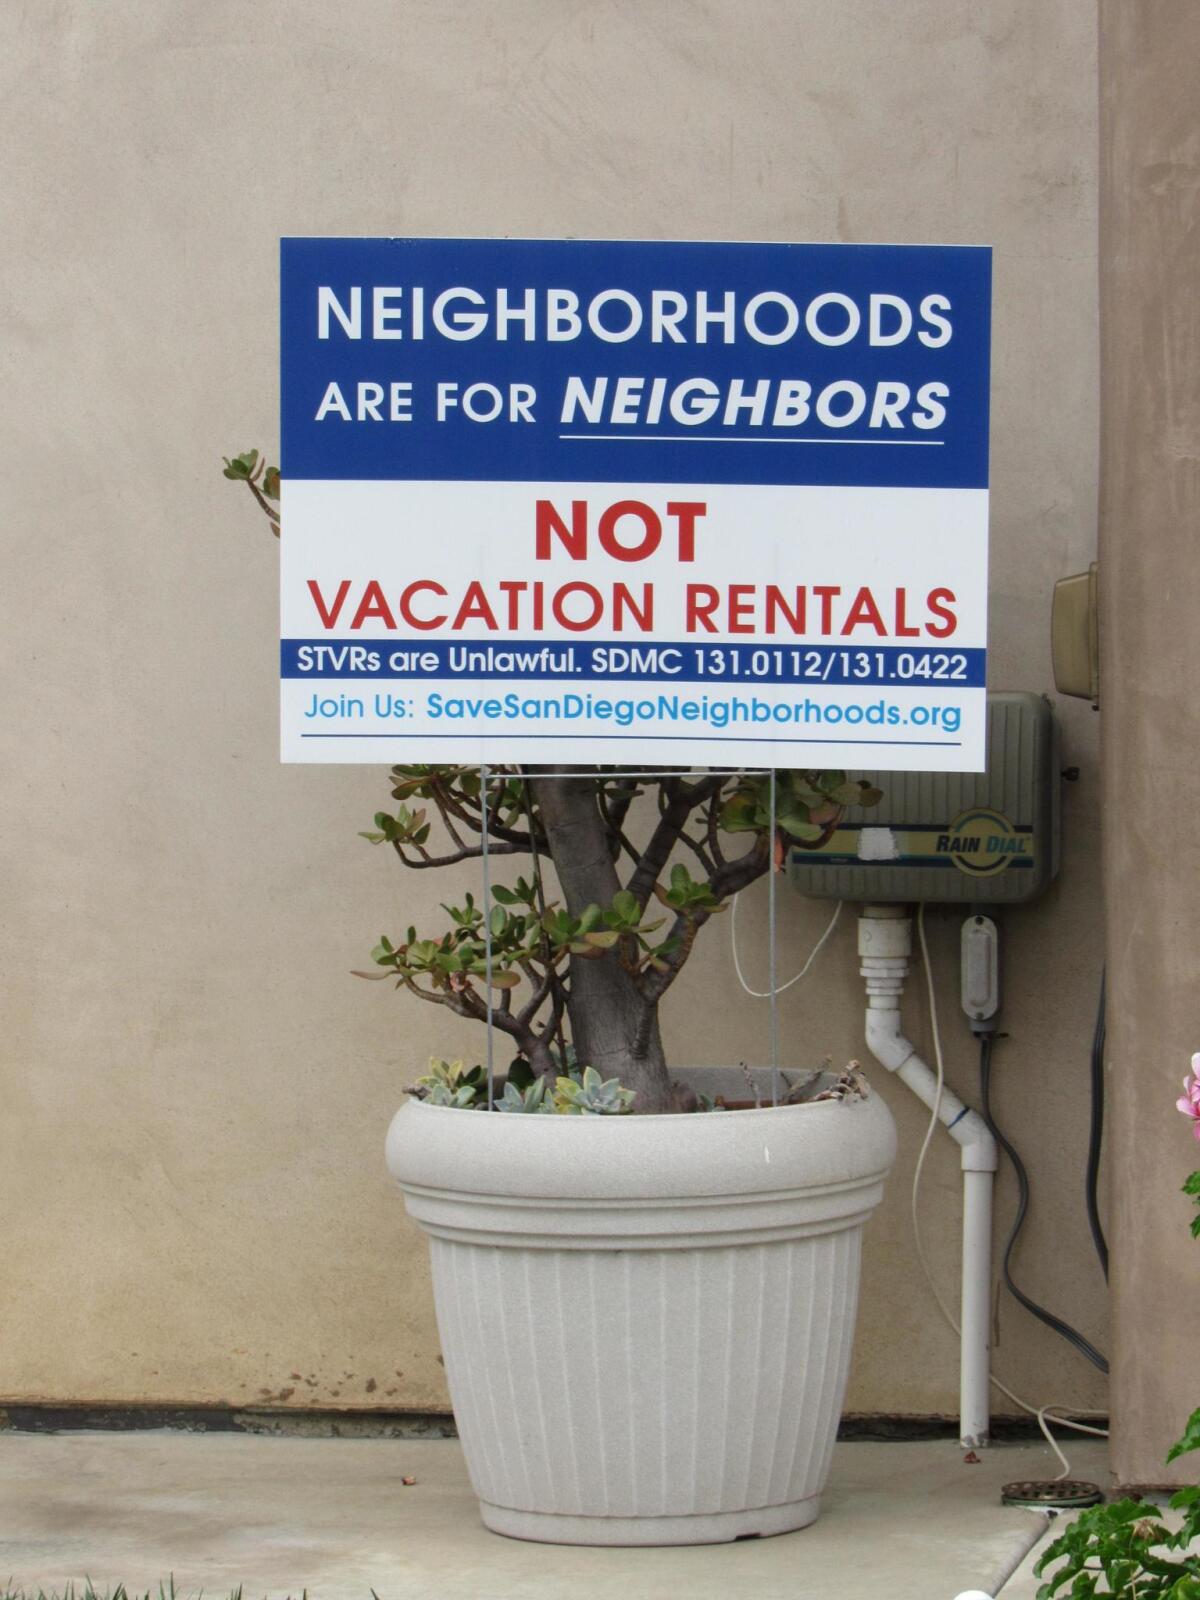 Signs like this have popped up across La Jolla and other areas in recent years in opposition to short-term vacation rentals. 